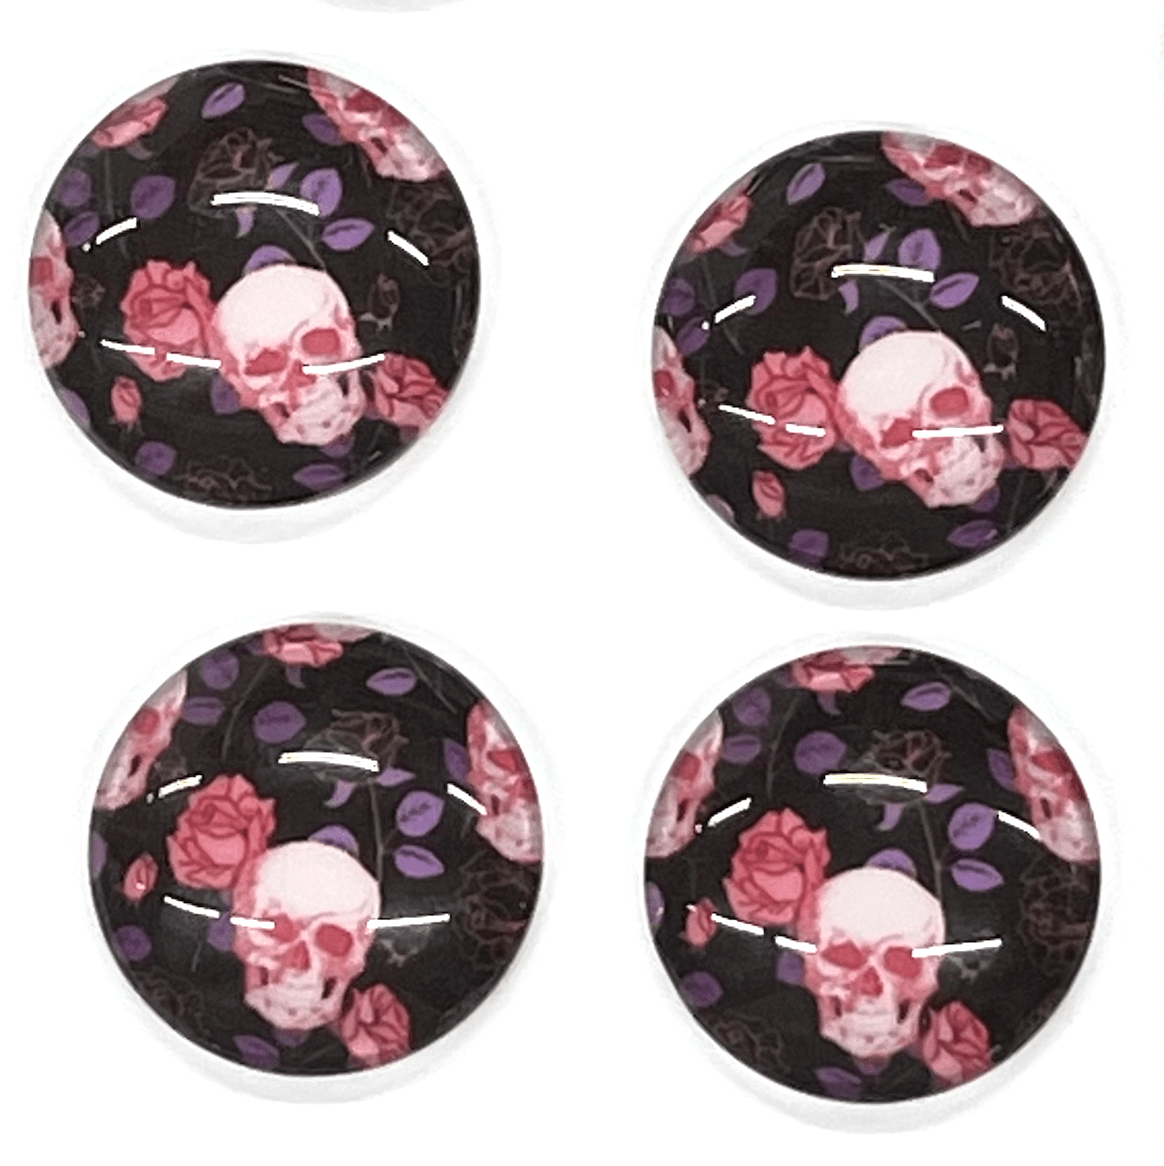 Sundaylace Creations & Bling Resin Gems 18mm "Skull with Pink Roses" Halloween on black background round, Glue on Acrylic Printed Resin Gem (Sold in Pair)